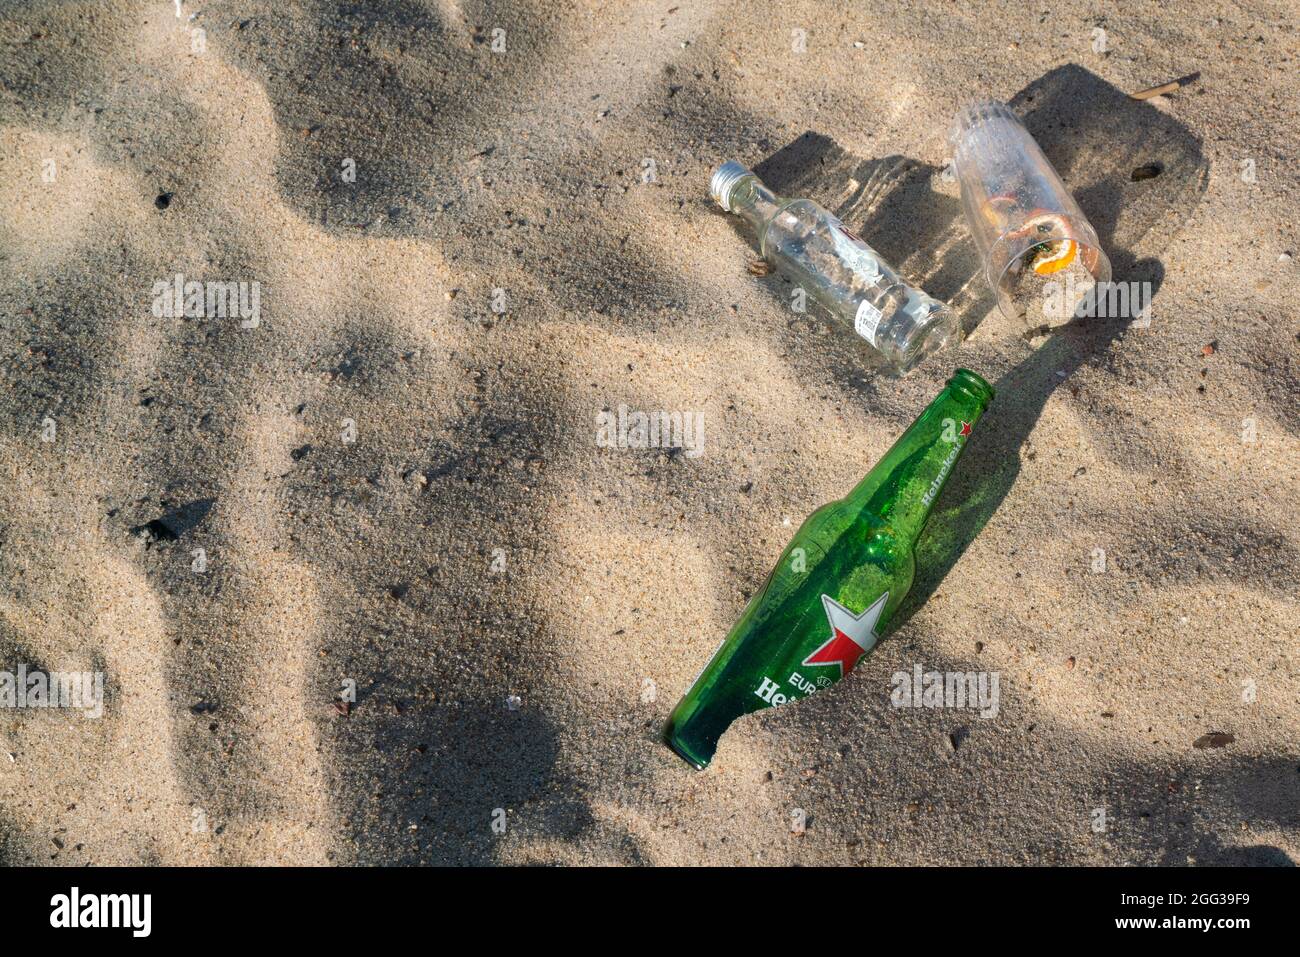 Hel, Poland - 08.02.2021: Detail shot of empty beer bottles and glasses lying on the beach sand in early morning after previous day party. Stock Photo